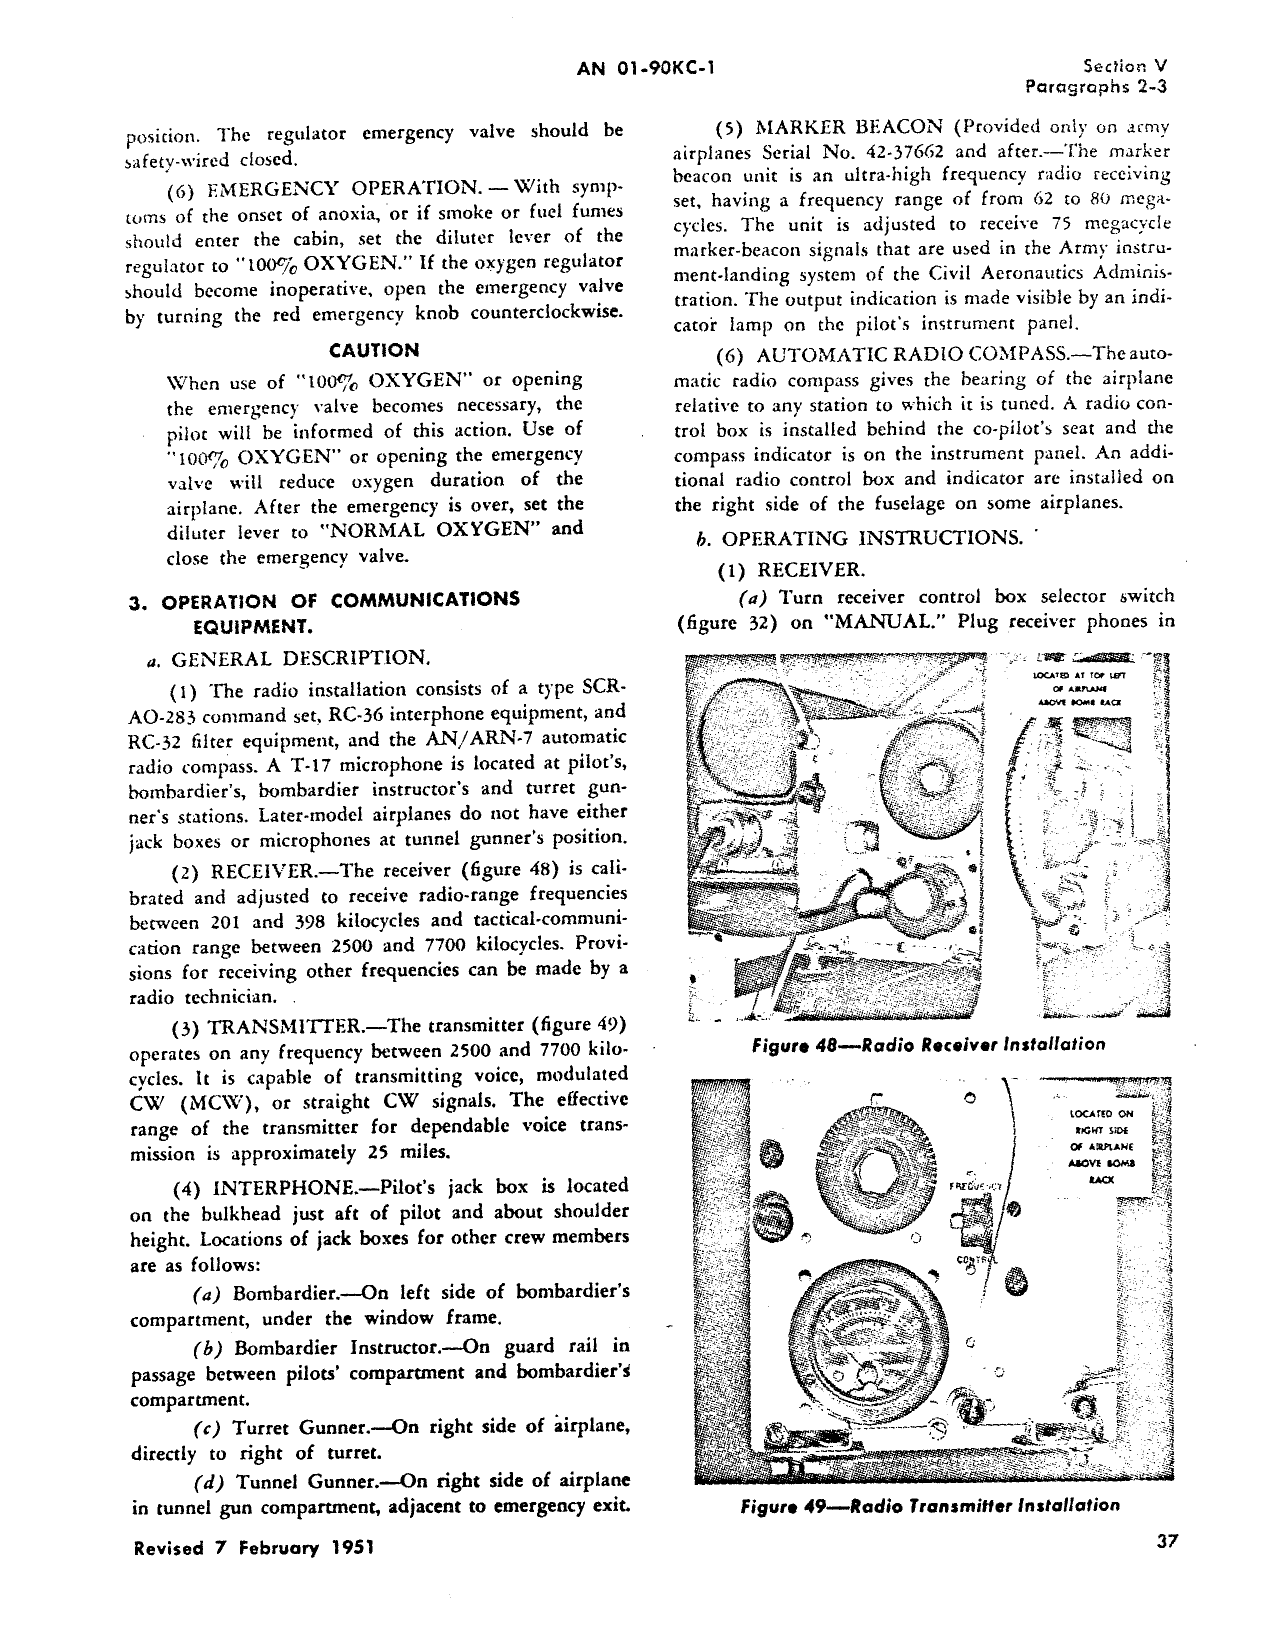 Sample page 45 from AirCorps Library document: Flight Operating Instructions - AT-11